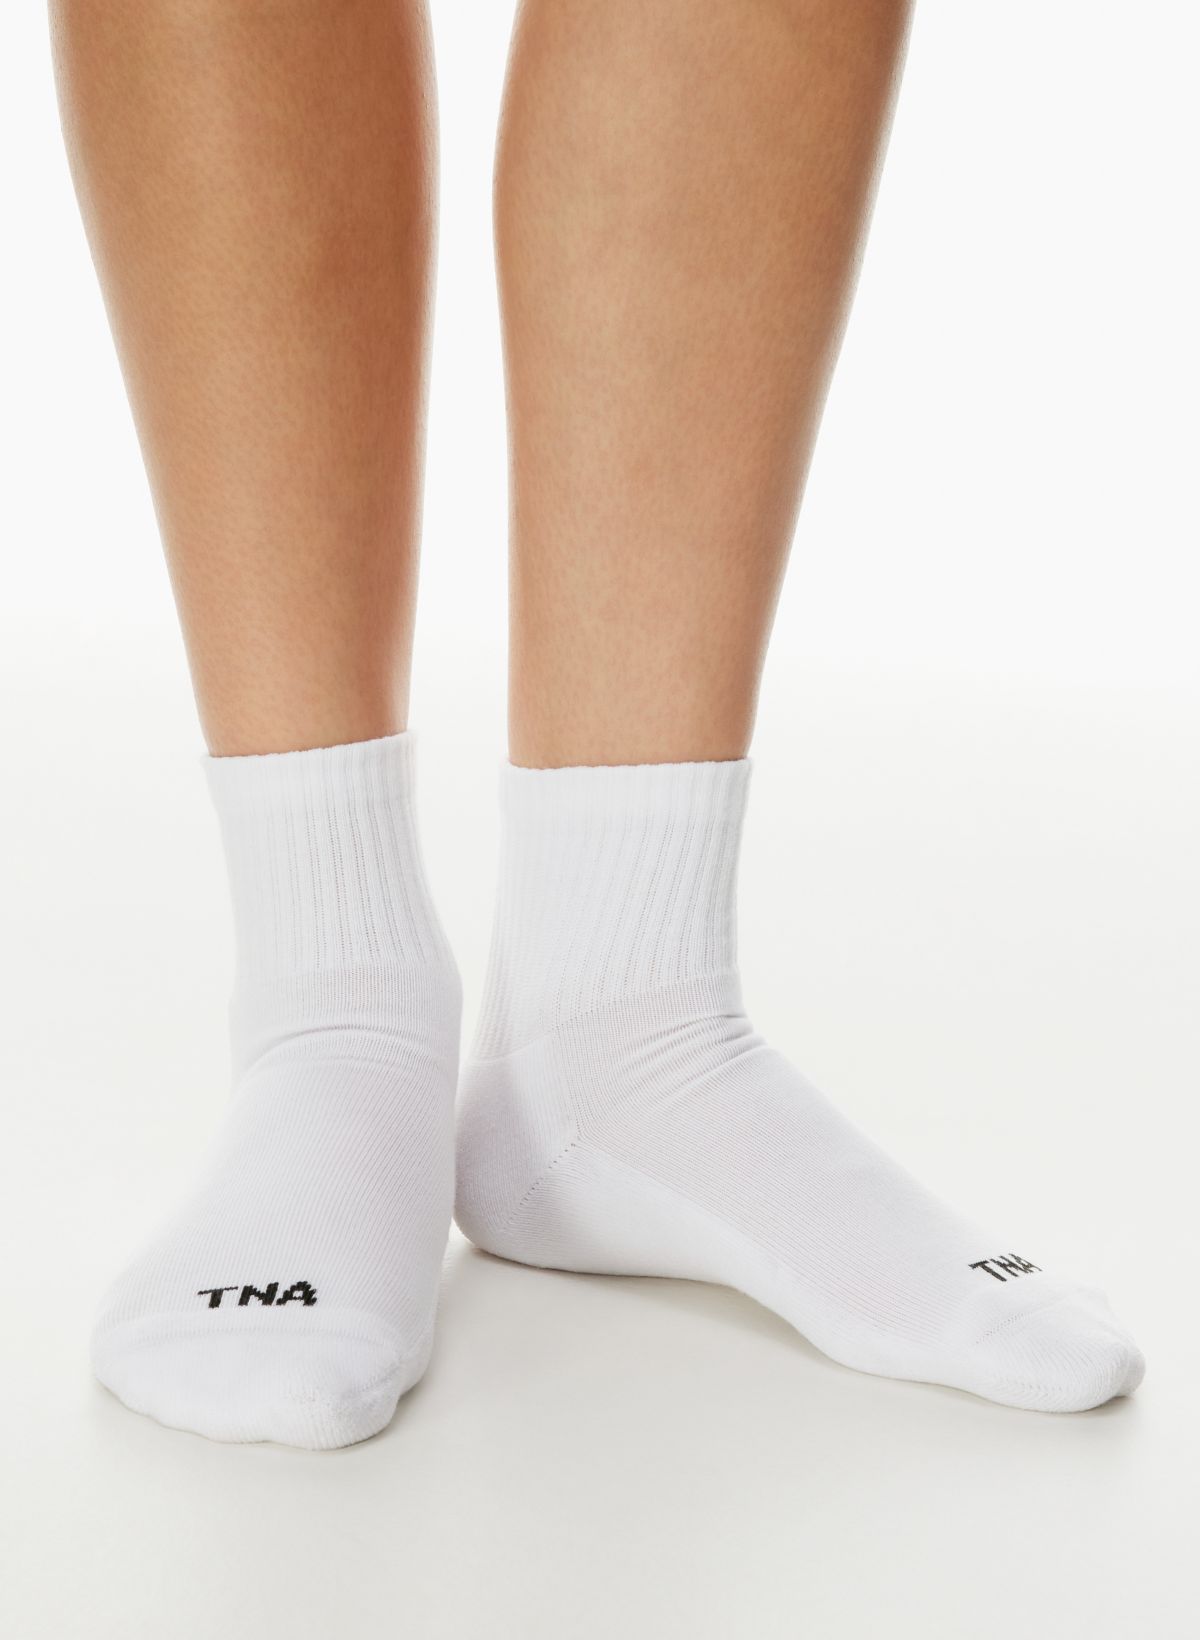 16 Best Socks That Don't Slouch On The Job–Find Your Perfect Pair